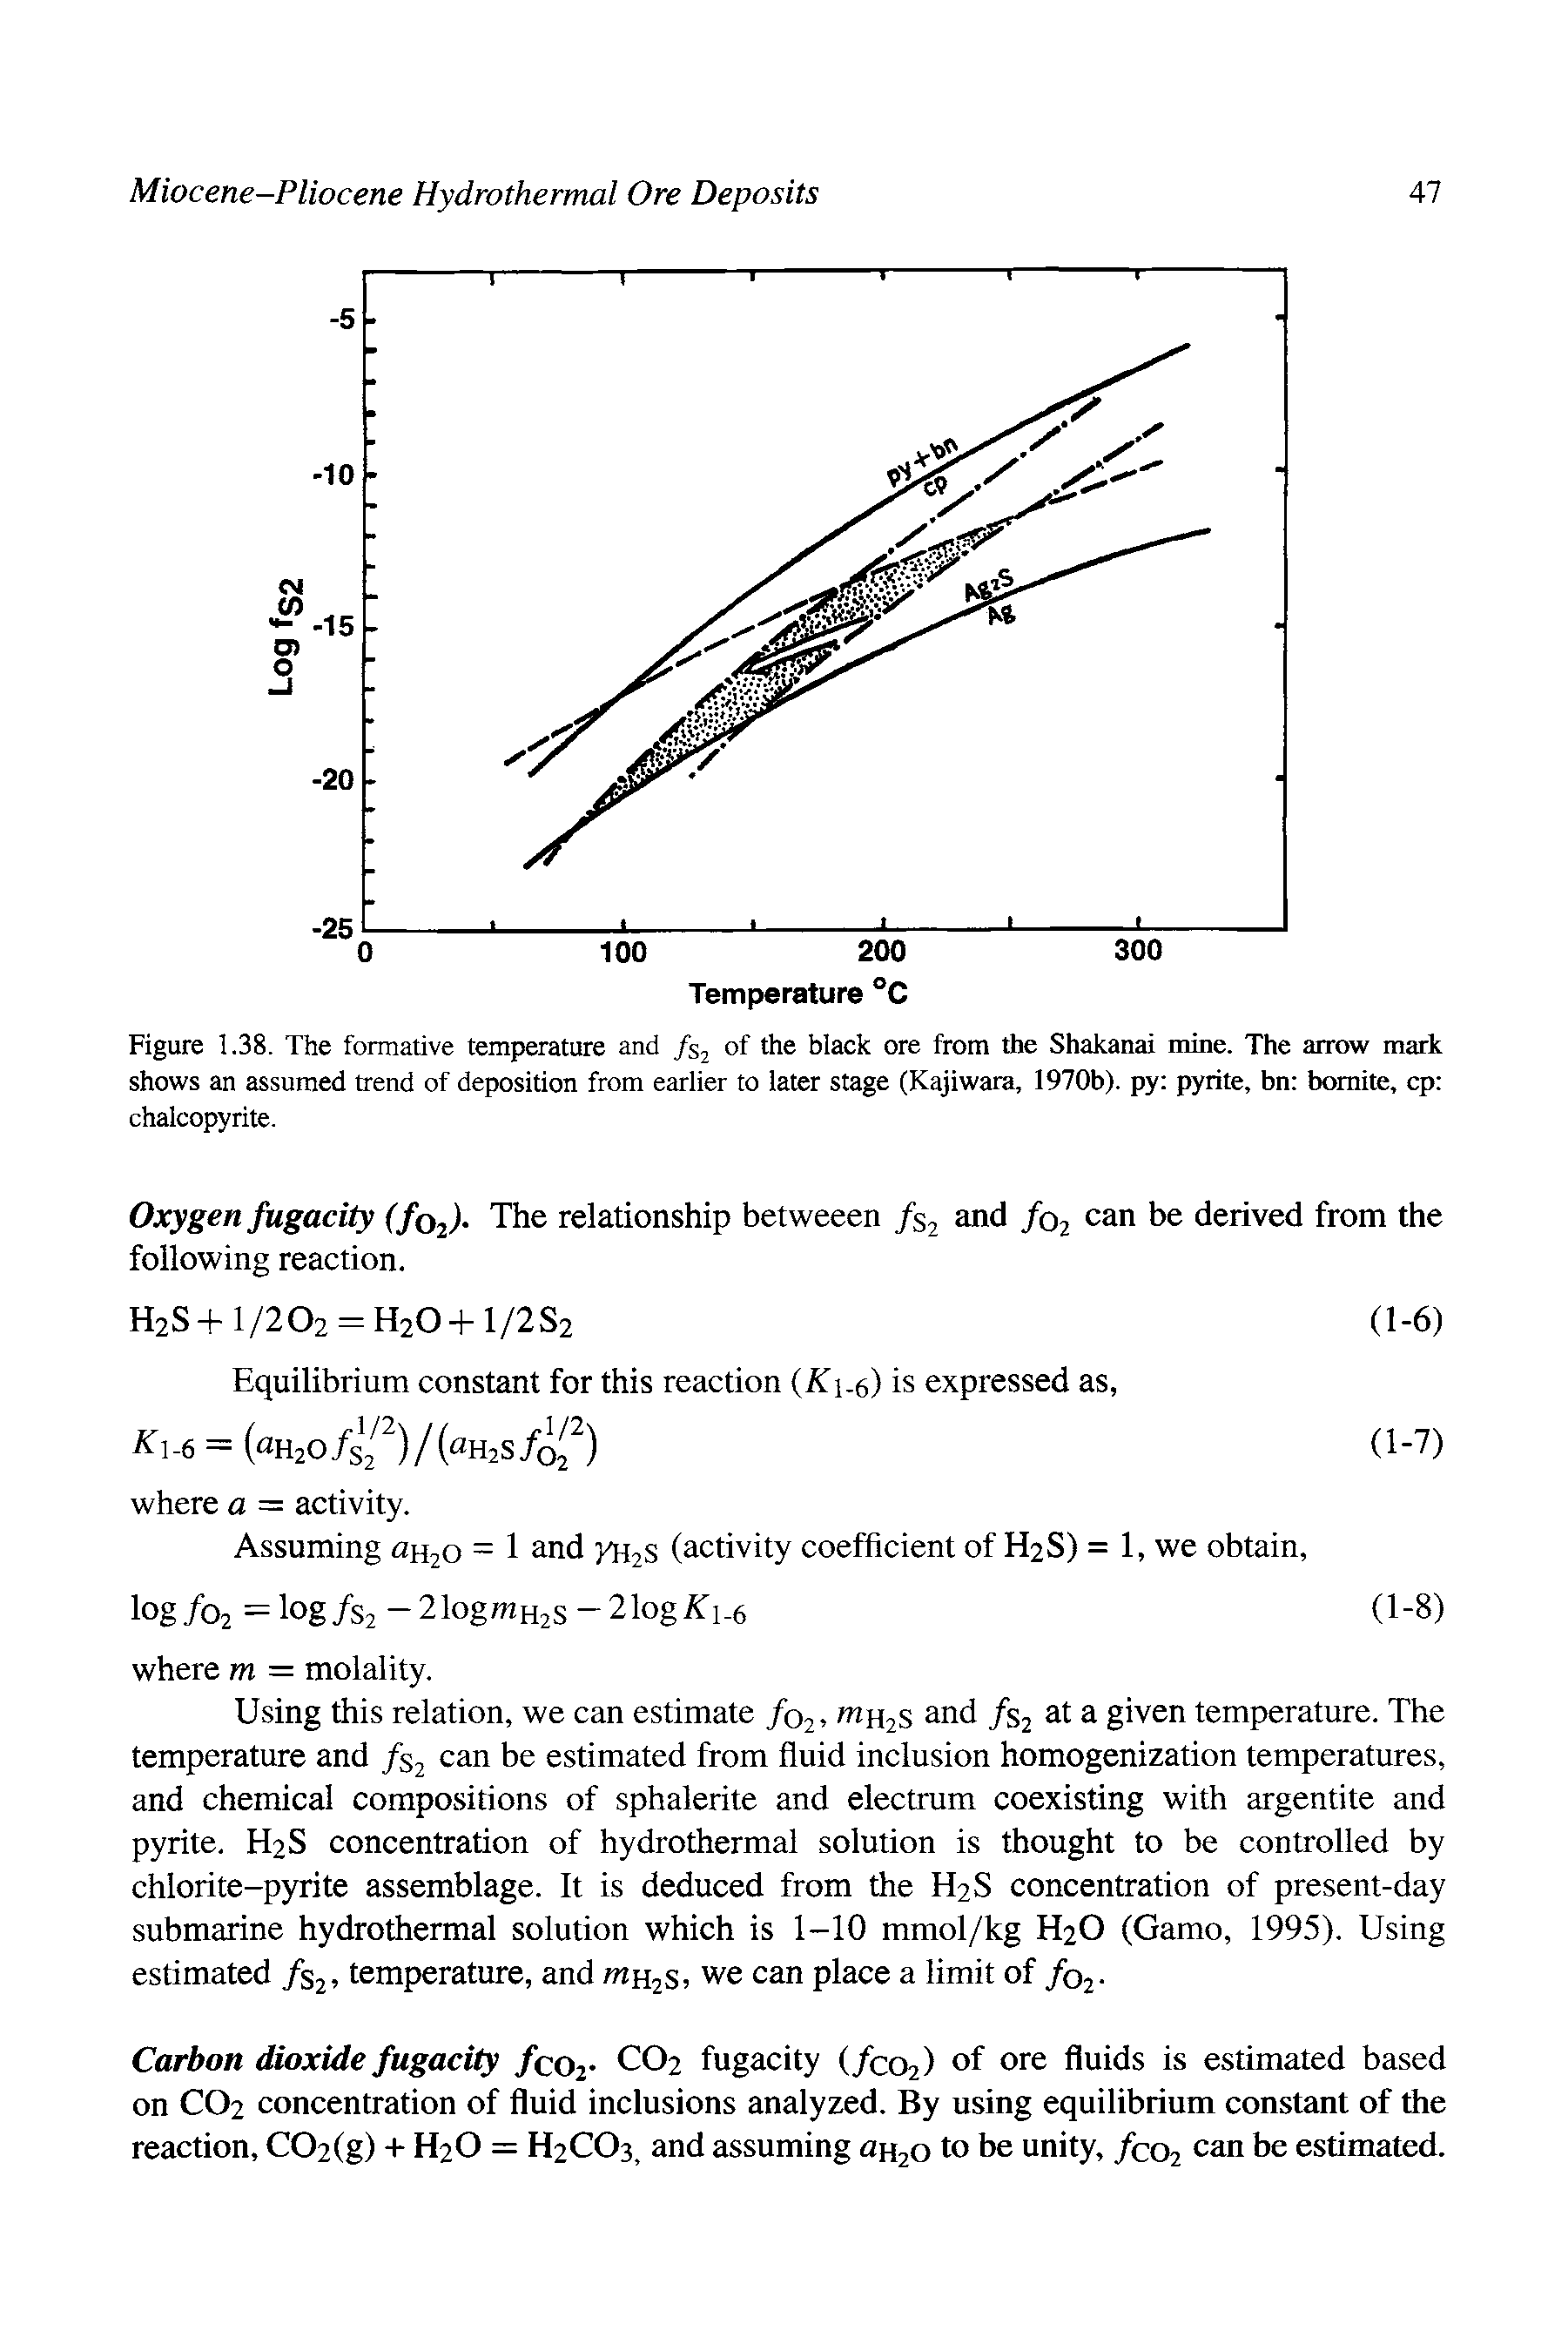 Figure 1.38. The formative temperature and /s of the black ore from the Shakanai mine. The arrow mark shows an assumed trend of deposition from earlier to later stage (Kajiwara, 1970b). py pyrite, bn bomite, cp chalcopyrite.